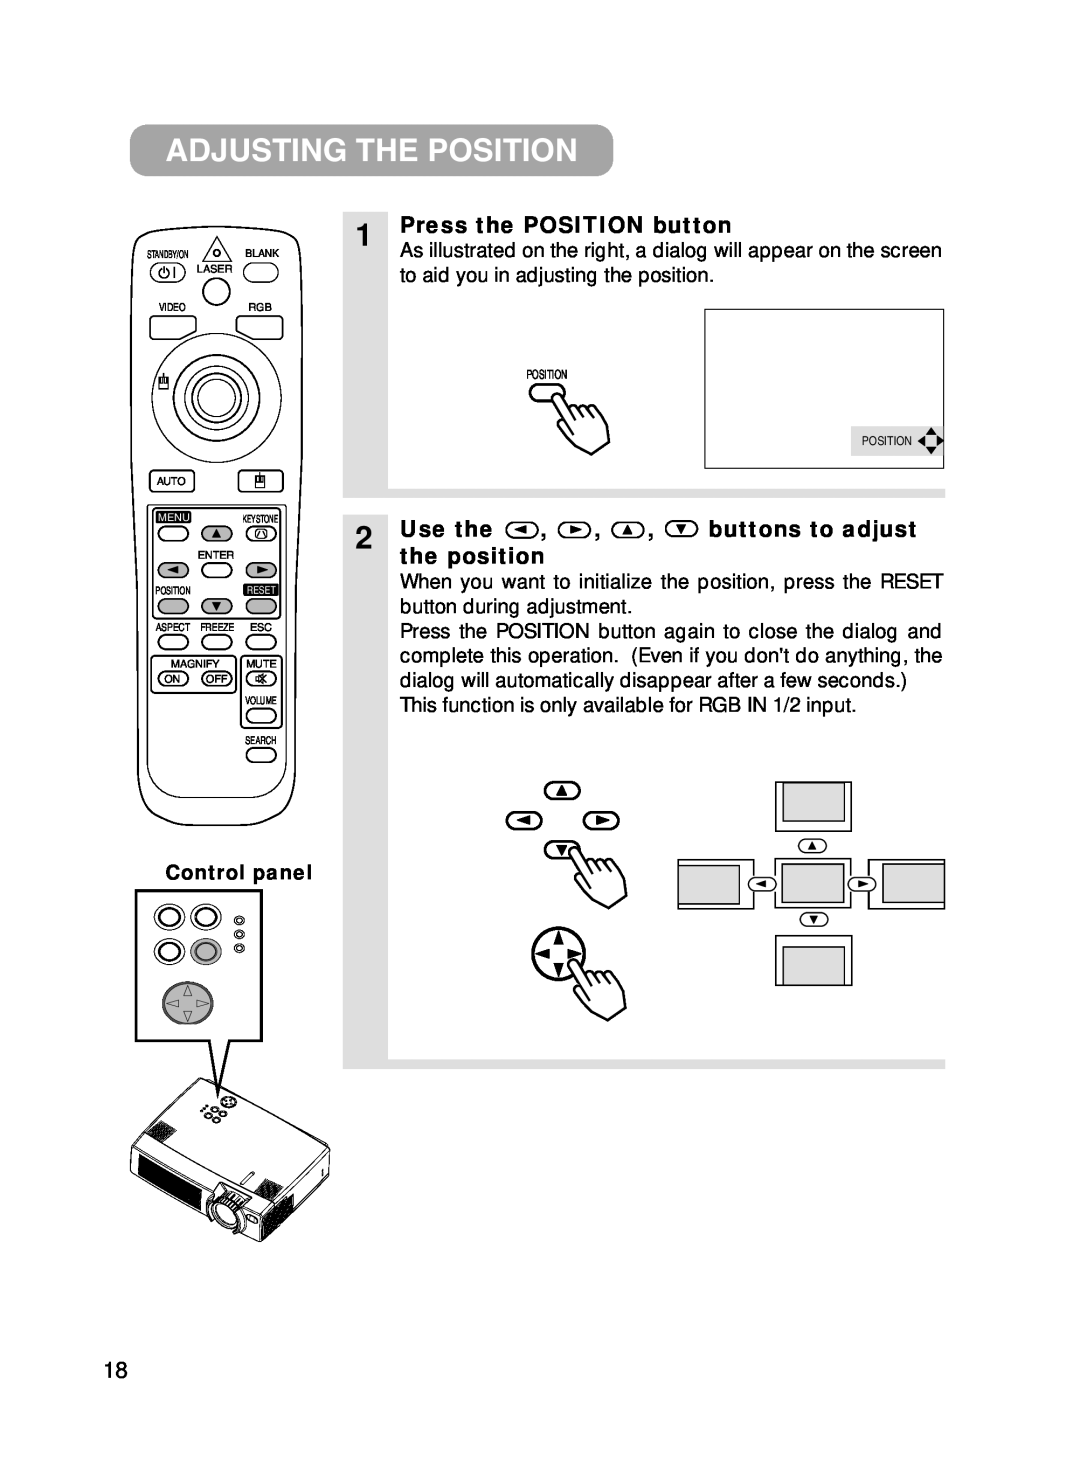 Hitachi CPX385W user manual Adjusting The Position, Press the POSITION button, Use the, the position, buttons to adjust 